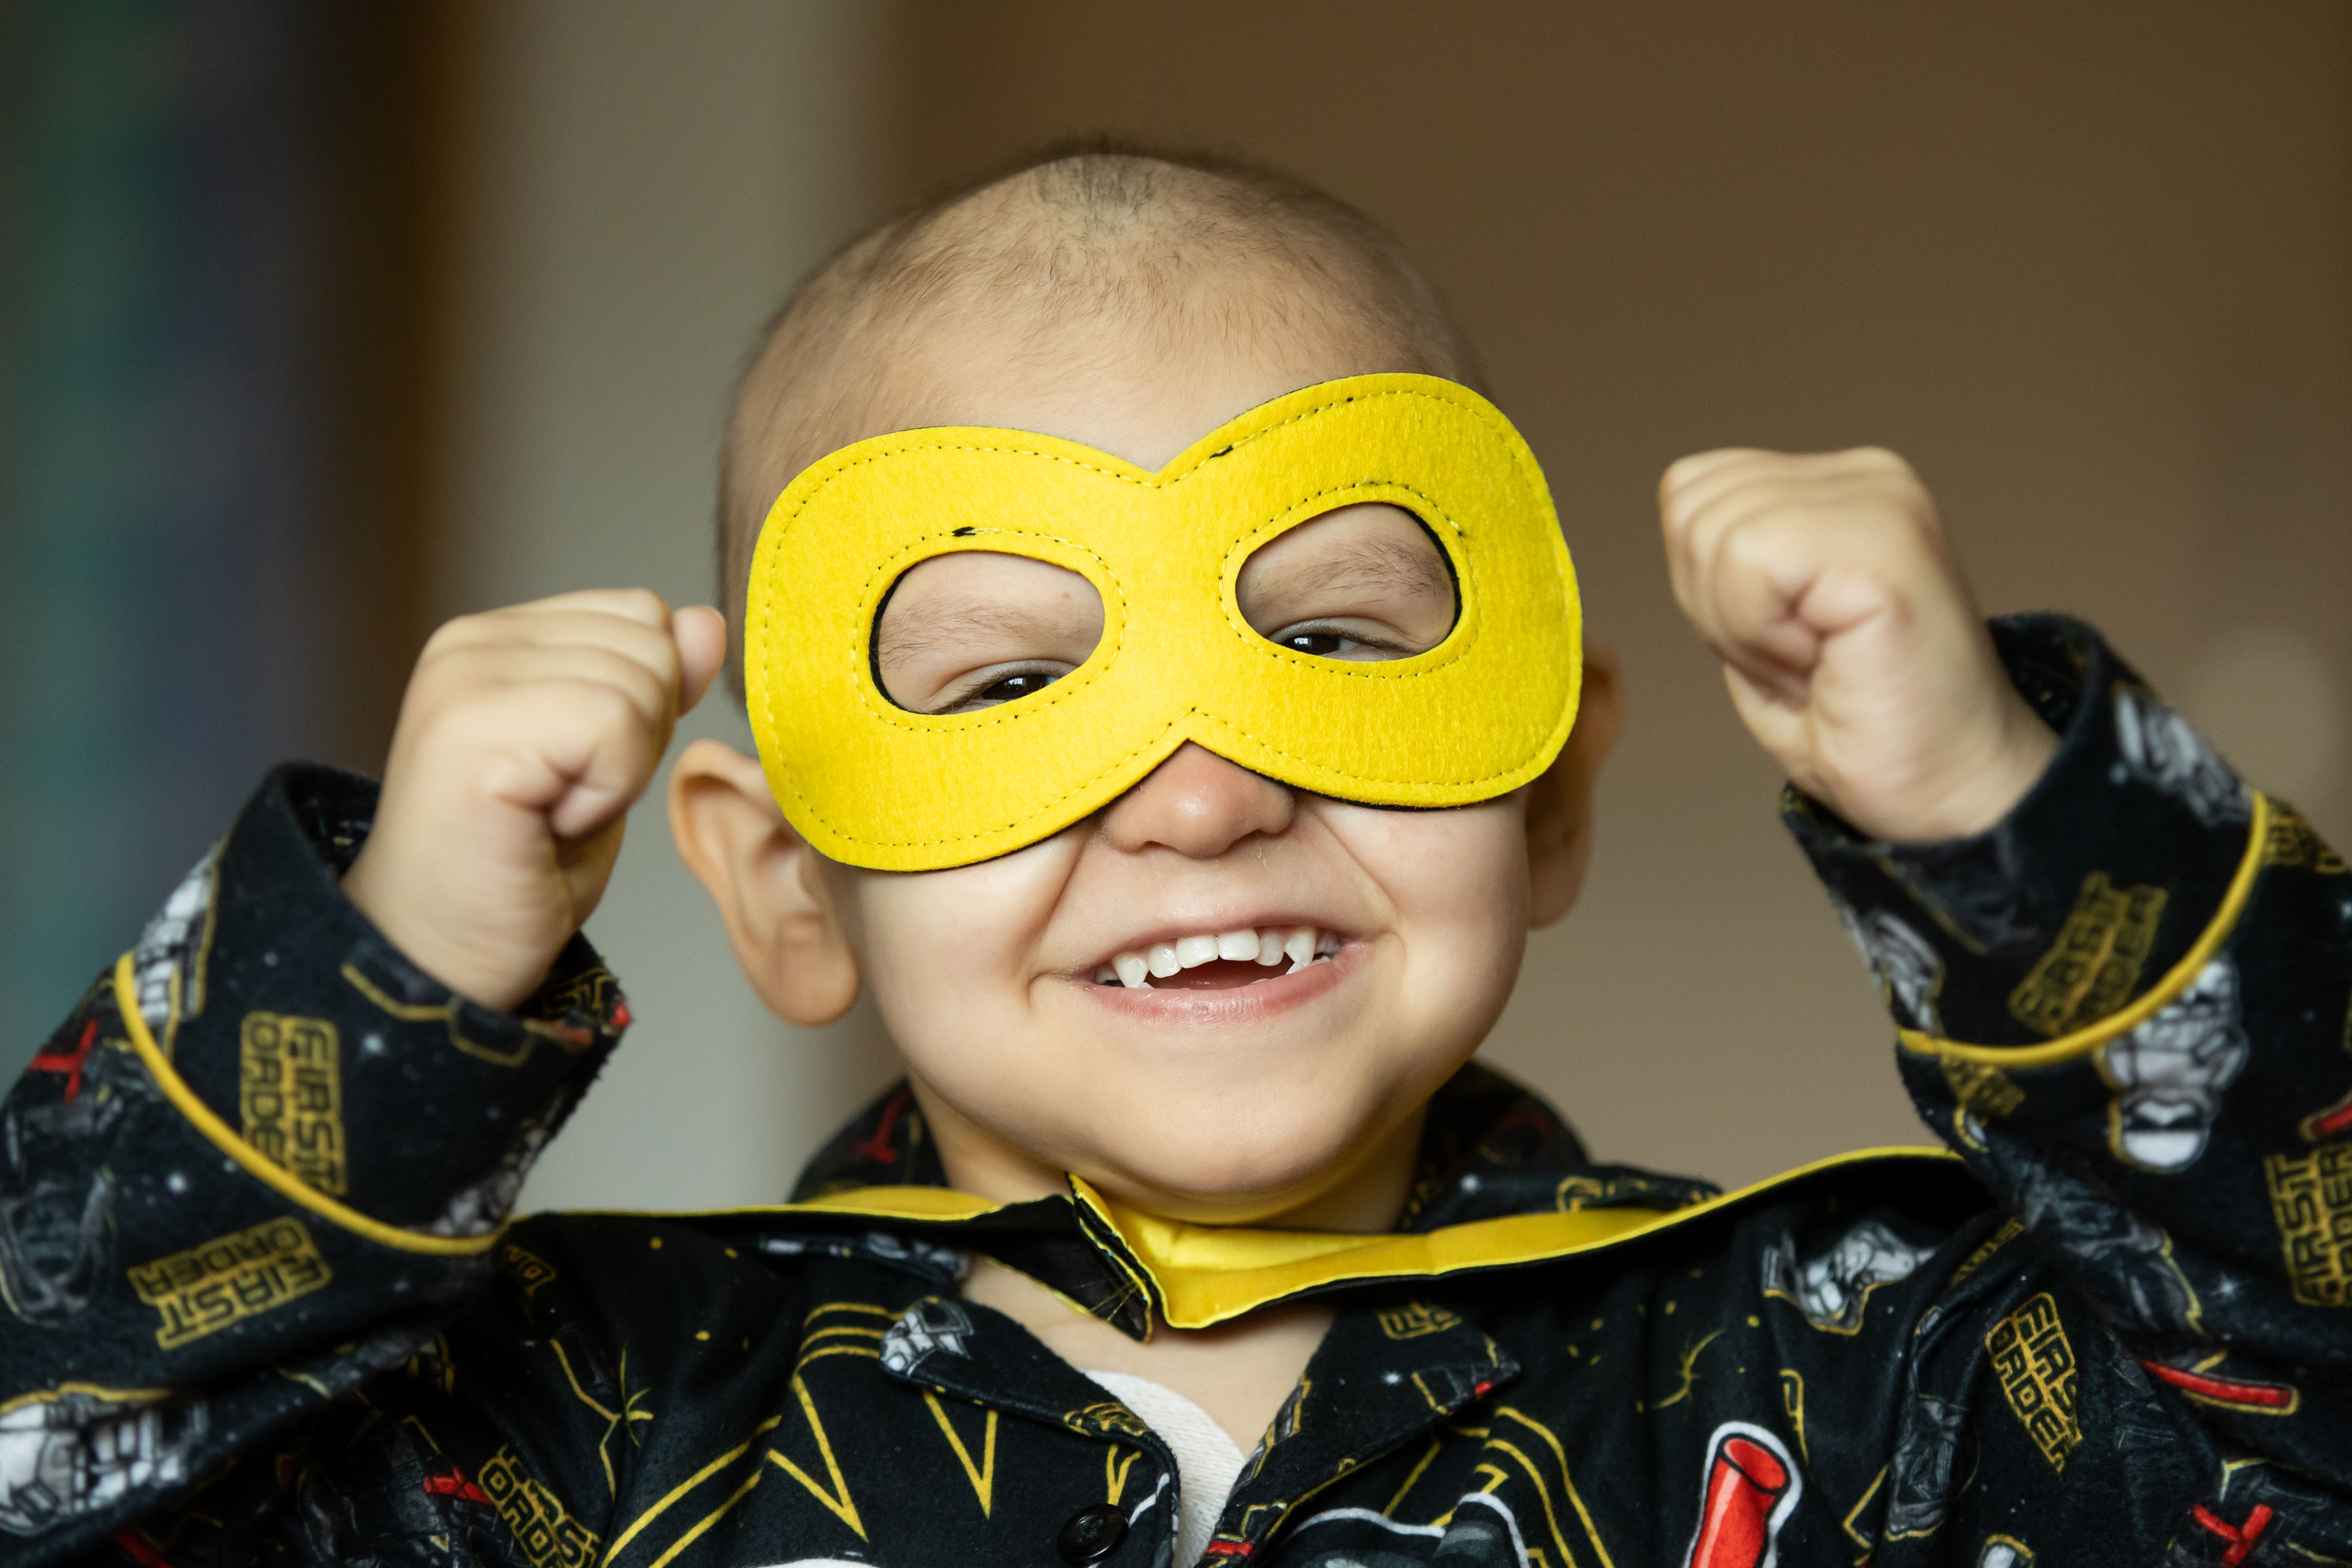 boy in superhero mask smiles while doing strong arm pose